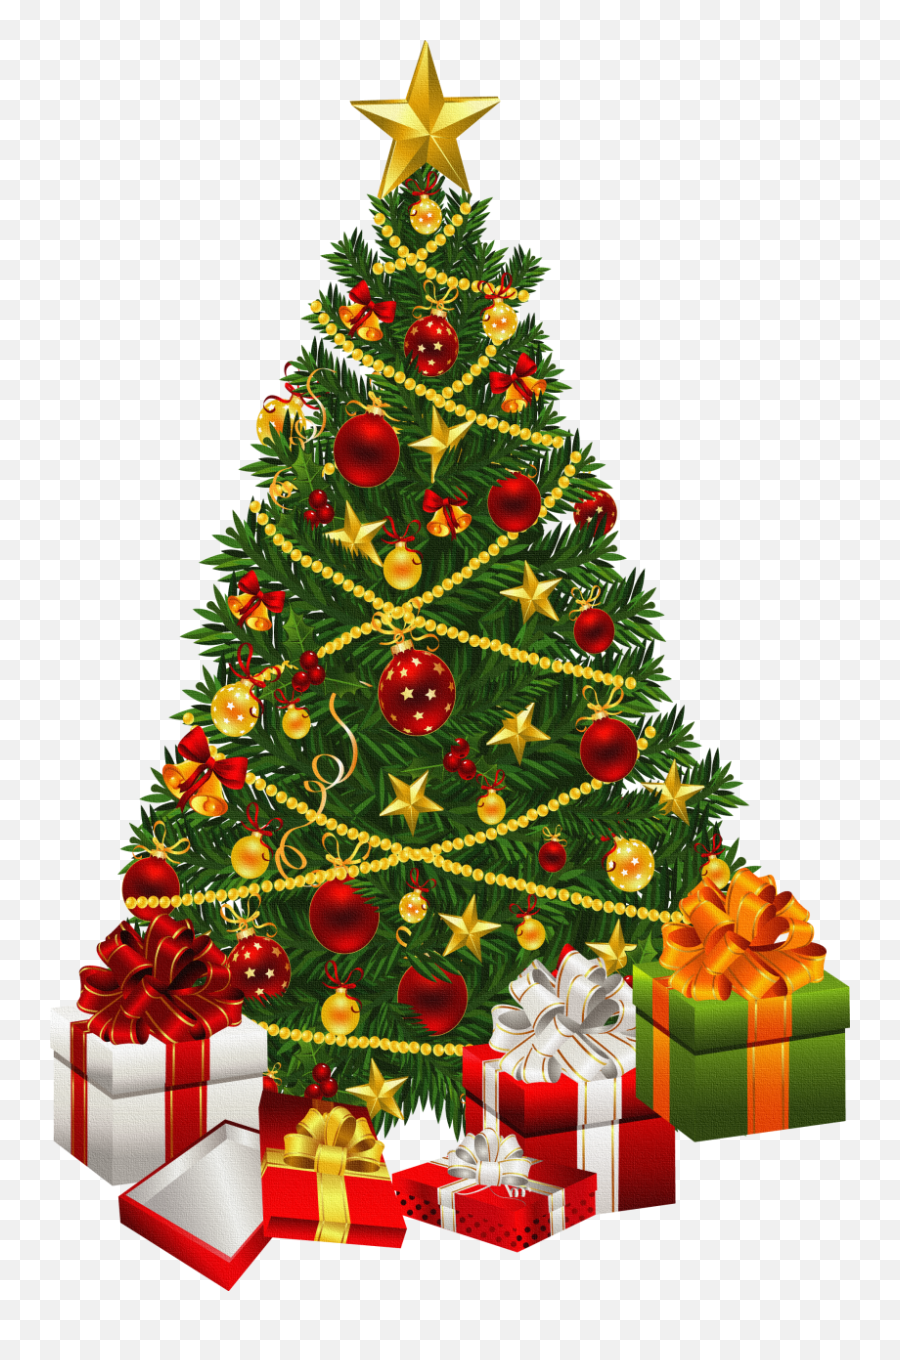 Download Christmas Tree Clipart - Christmas Tree Hd Png,Christmas Tree Transparent Background